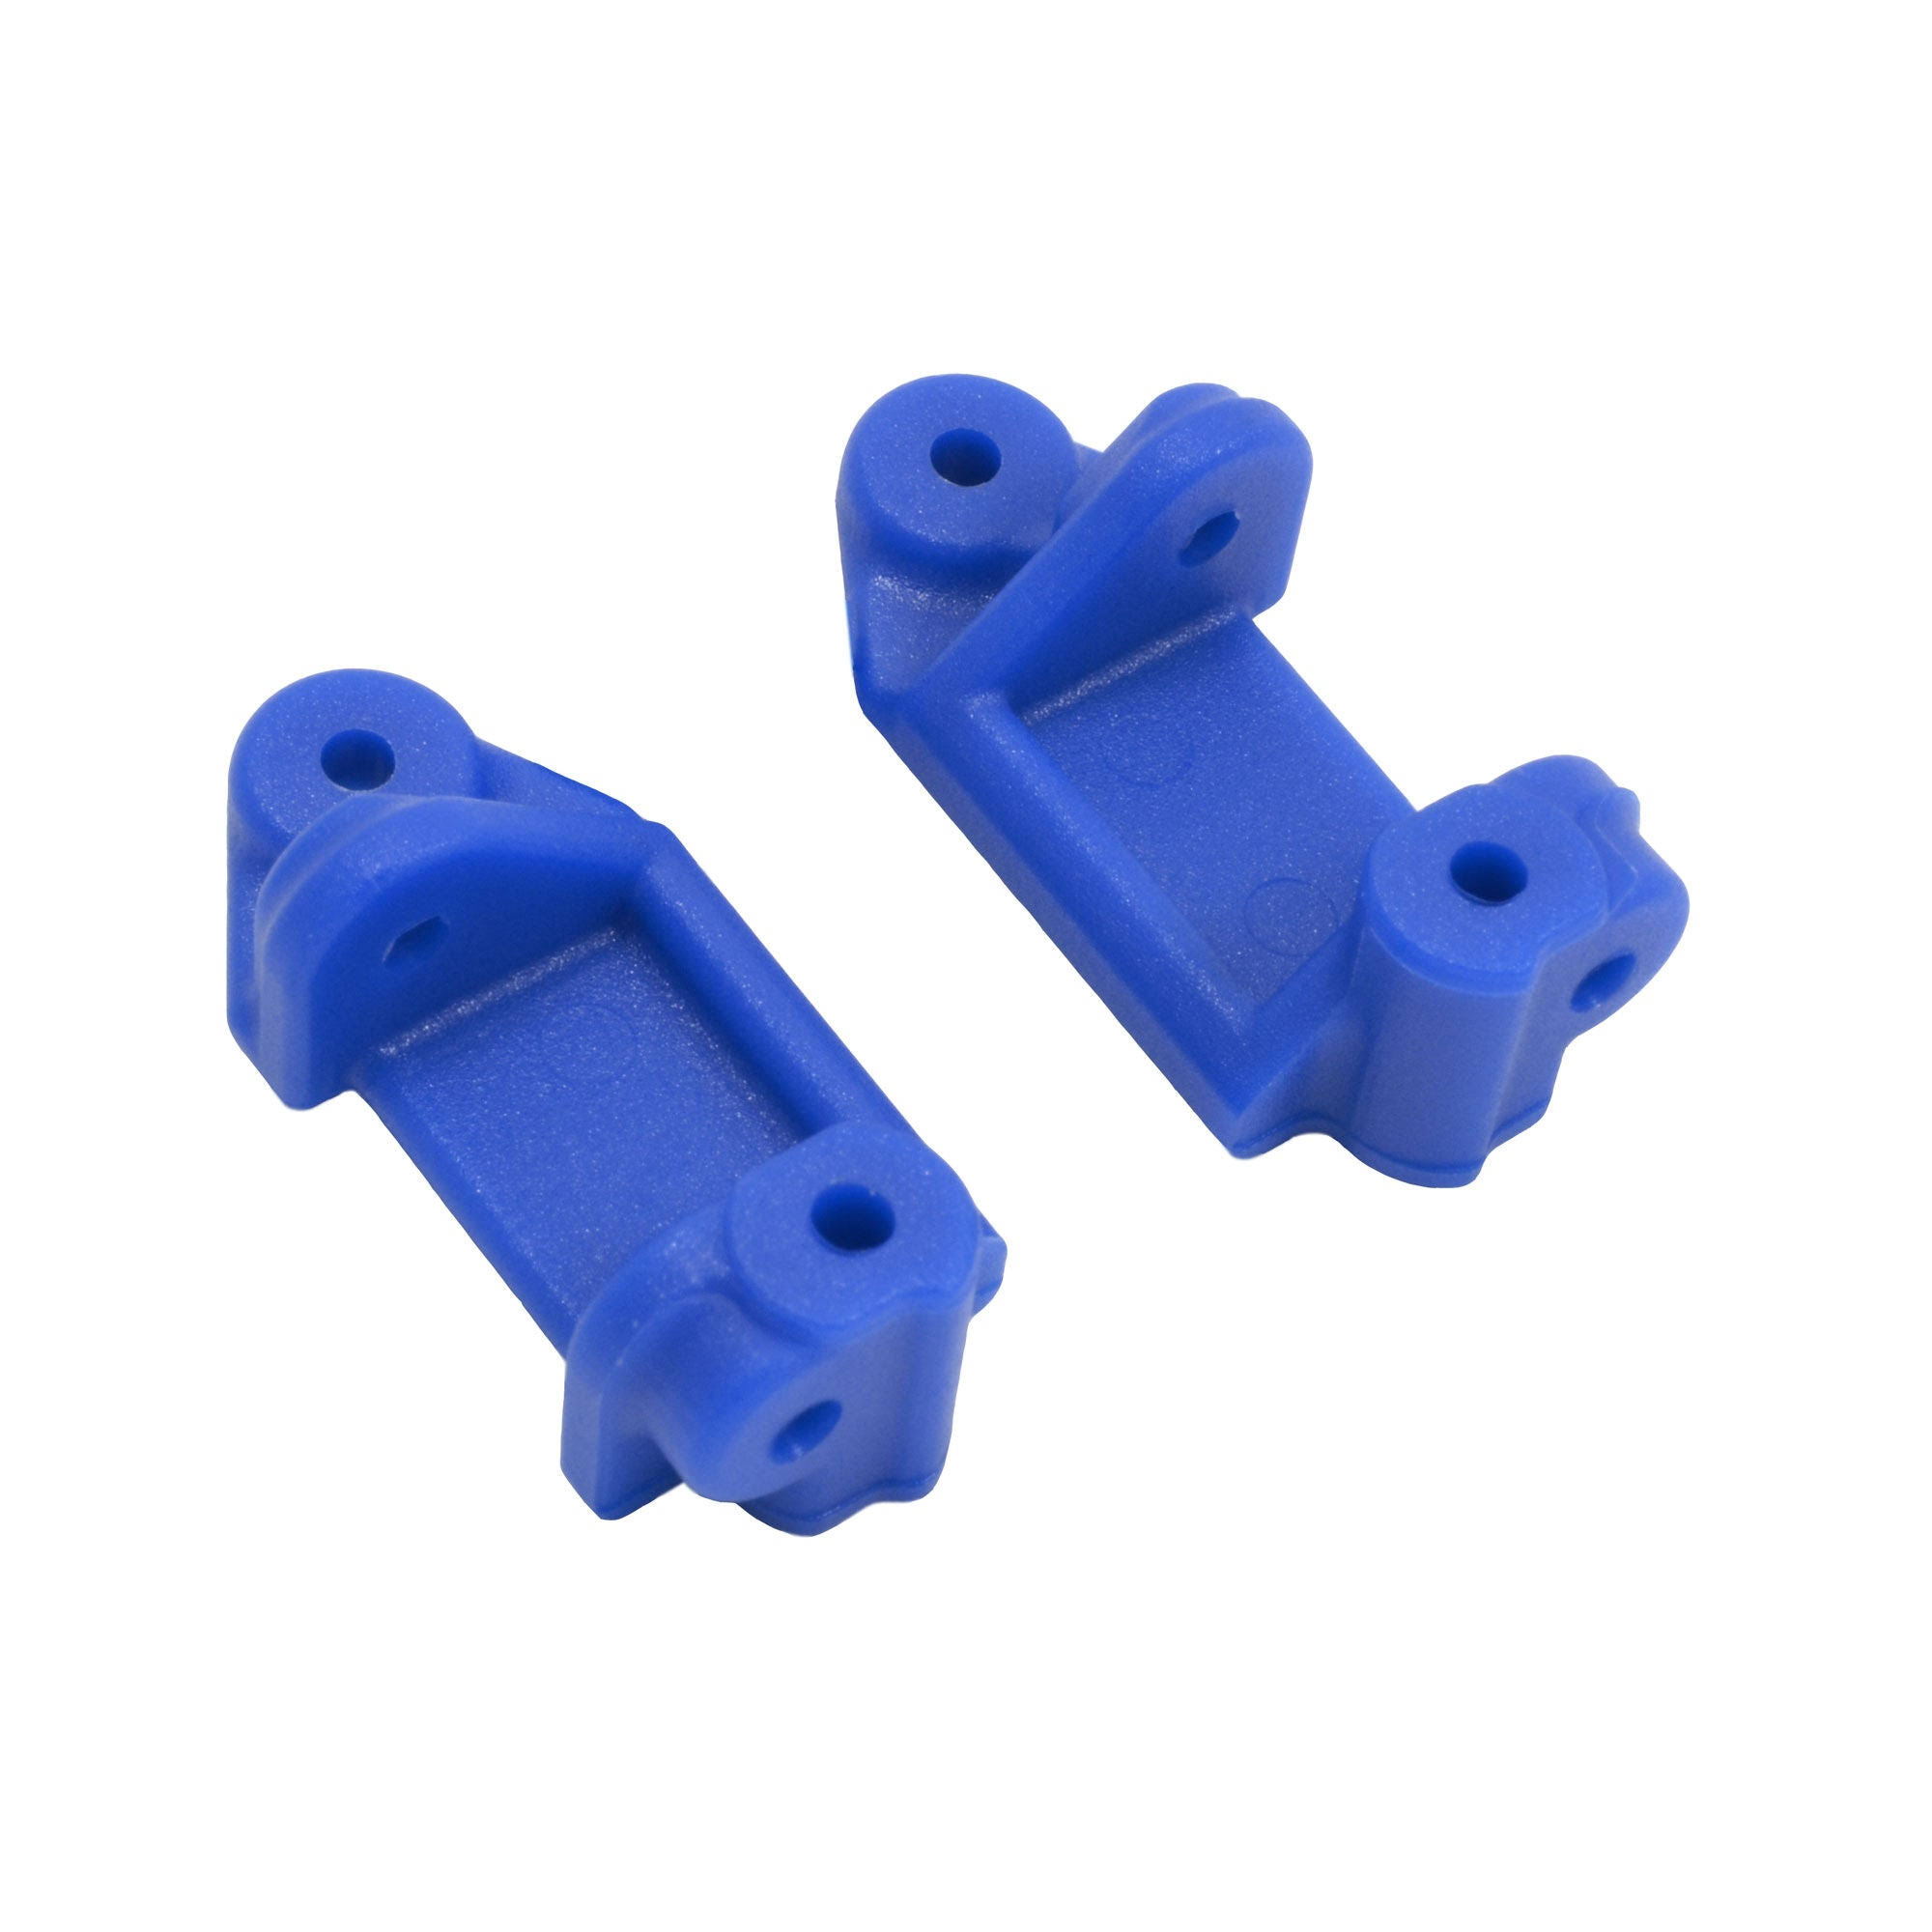 Traxxas Electric 2wd RPM Front Caster Blocks - Blue